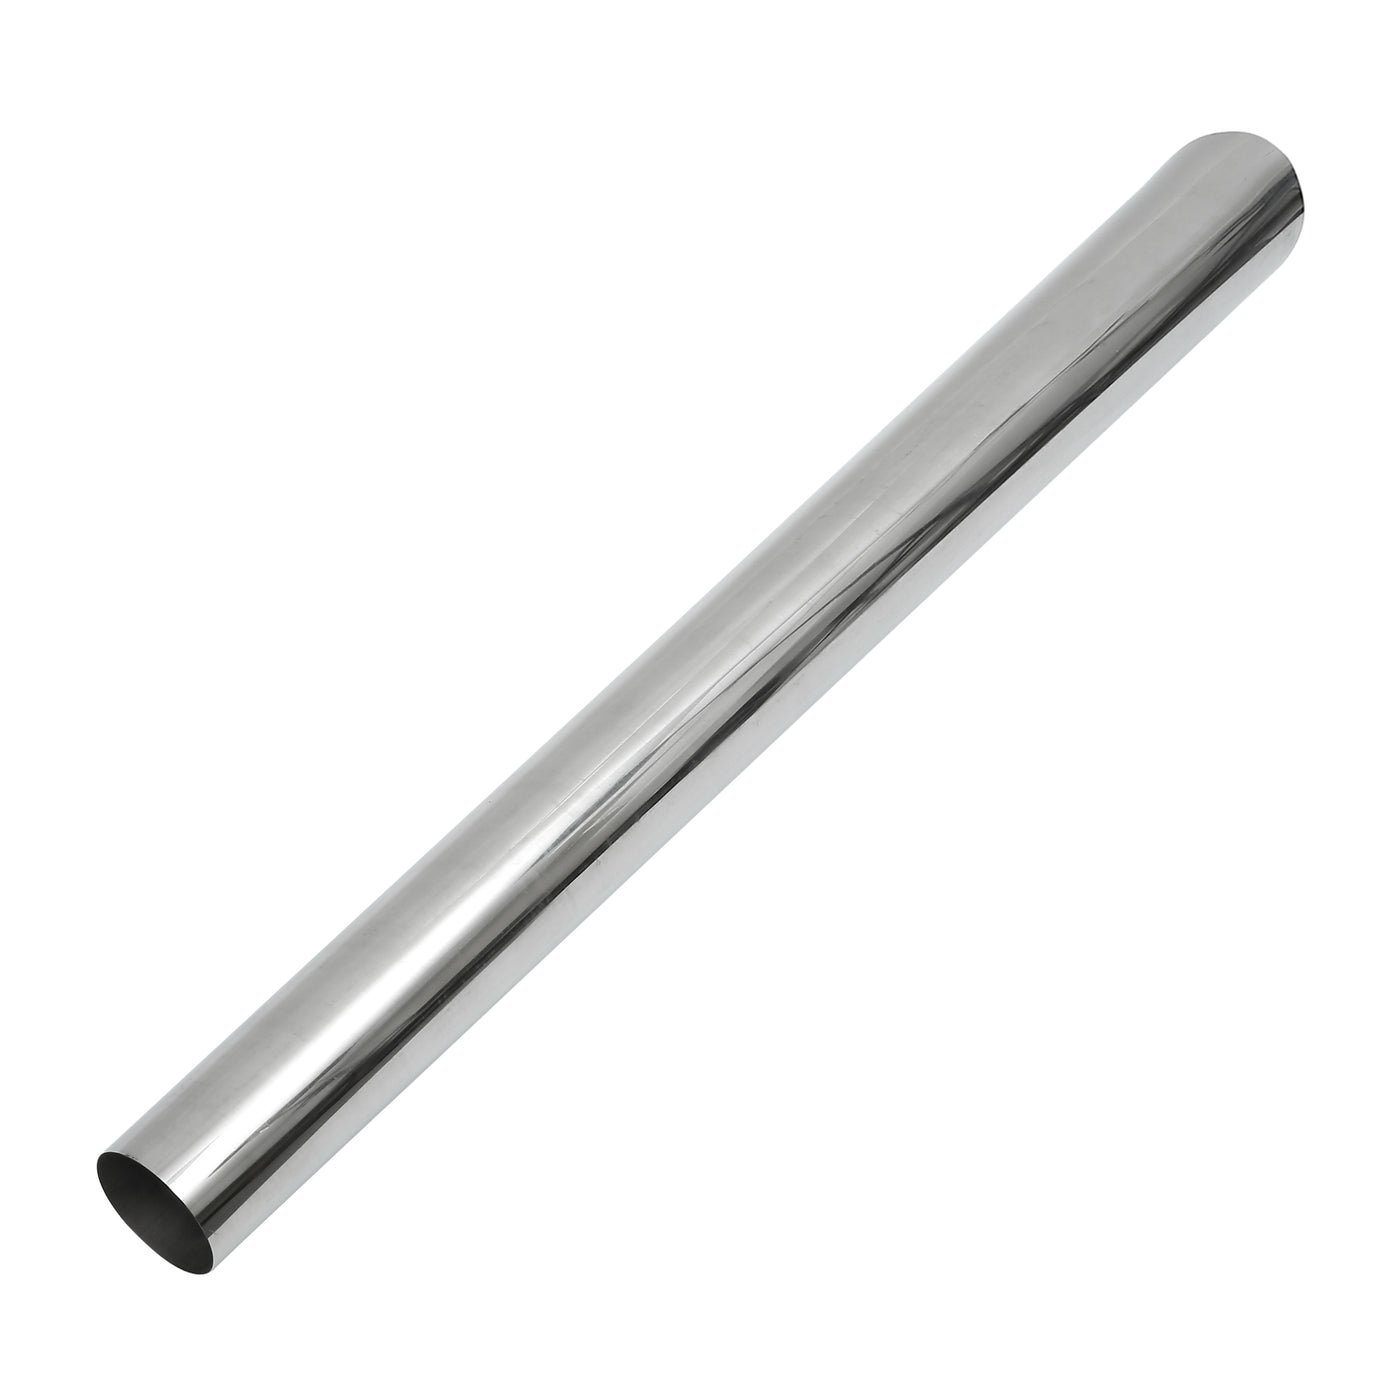 A ABSOPRO Car Mandrel Exhaust Pipe Tube Durable 48" Length 5'' OD Straight Exhaust Tube DIY Custom 0 Degree Modified Piping T304 Stainless Steel Silver Tone